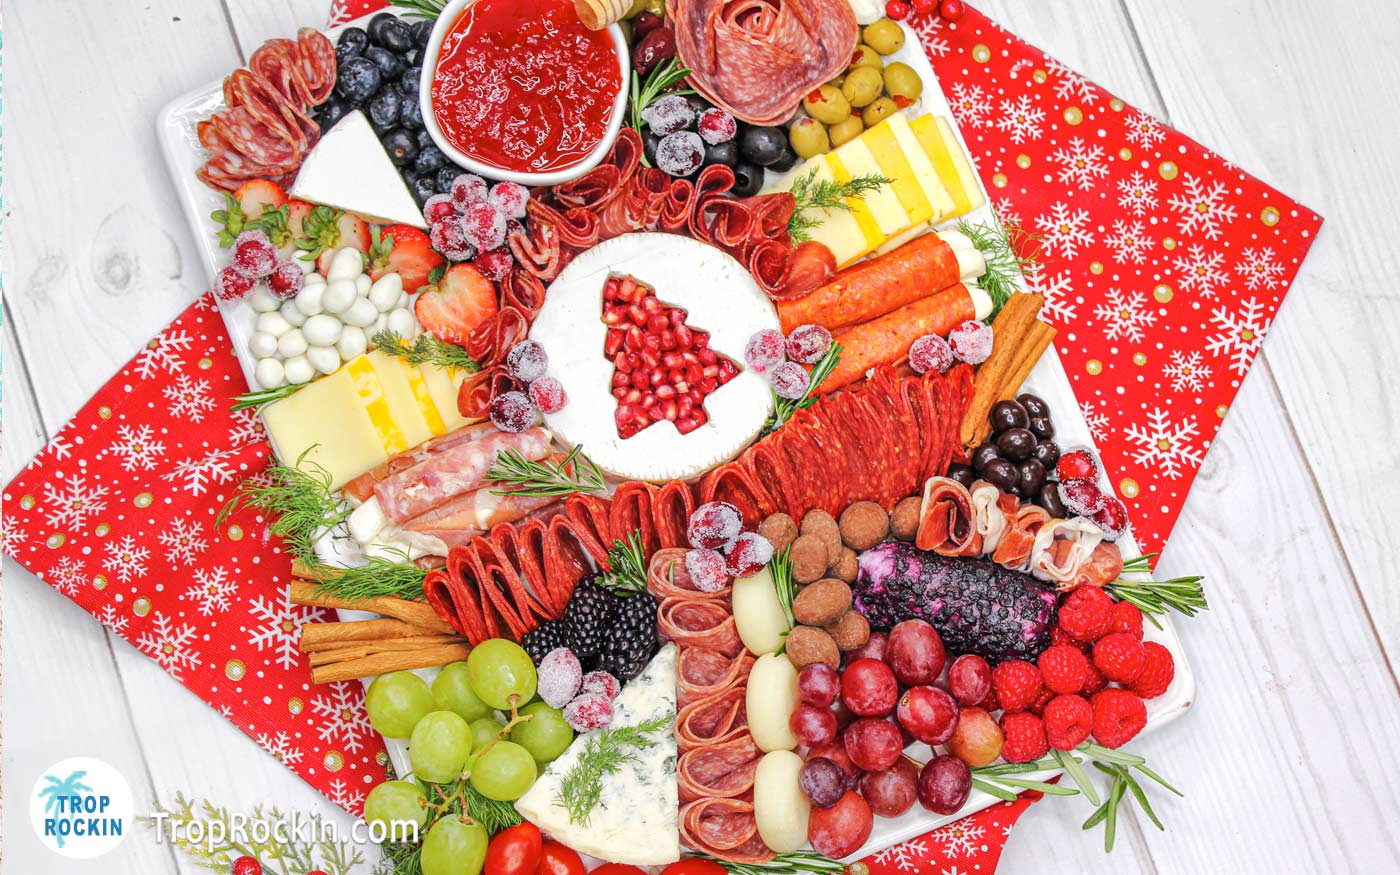 Christmas Charcuterie Board with a large variety of meats, cheeses, fresh fruits and snacks dispayed on a white platter with a red kitchen towel underneath on a white wood board background.